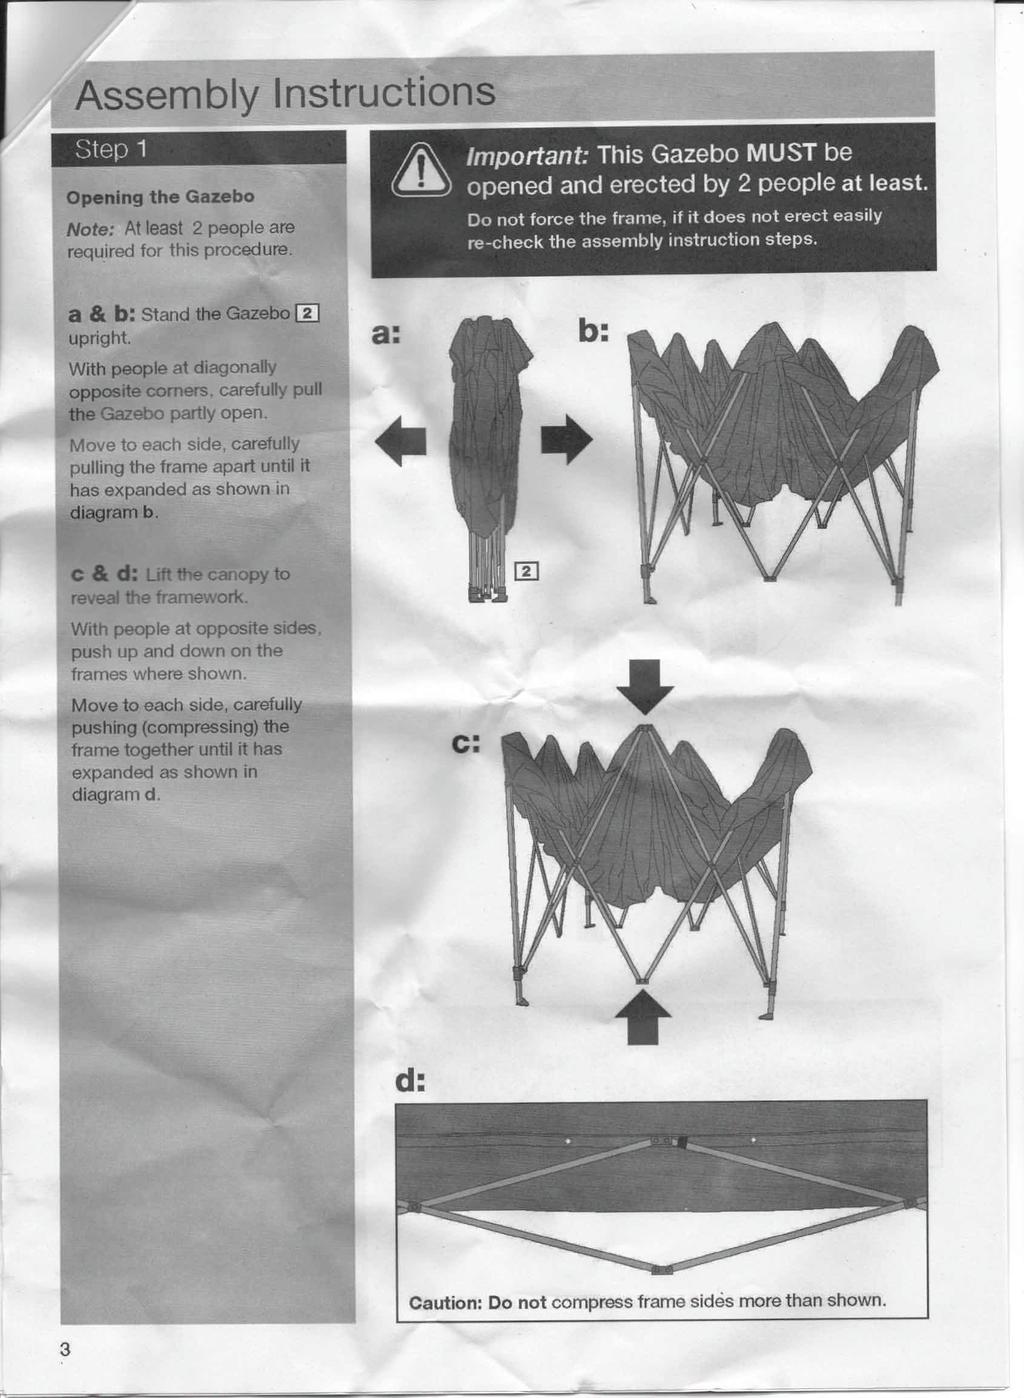 Assembly Instructions Step 1 Opening the Gazebo a & b: Stand the Gazebo m upright. With people at diagonally opposite corners. carefully pull the Gazebo partly open.